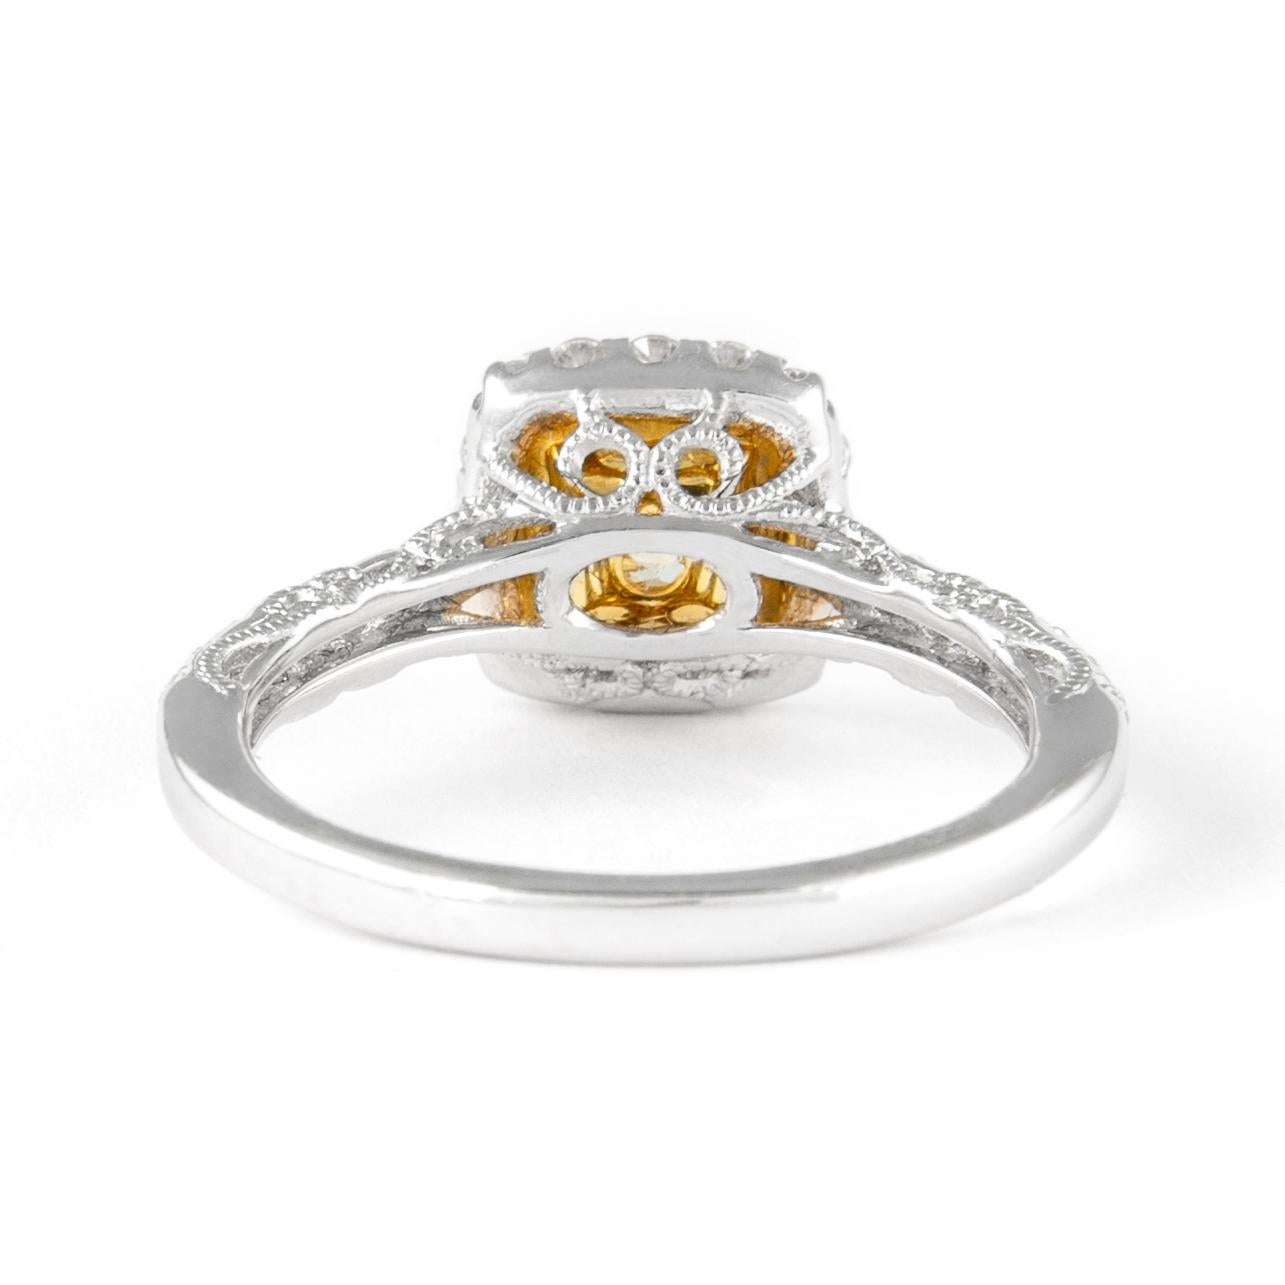 Alexander 1.01ct Fancy Intense Yellow Cushion Diamond with Halo Ring 18k In New Condition For Sale In BEVERLY HILLS, CA